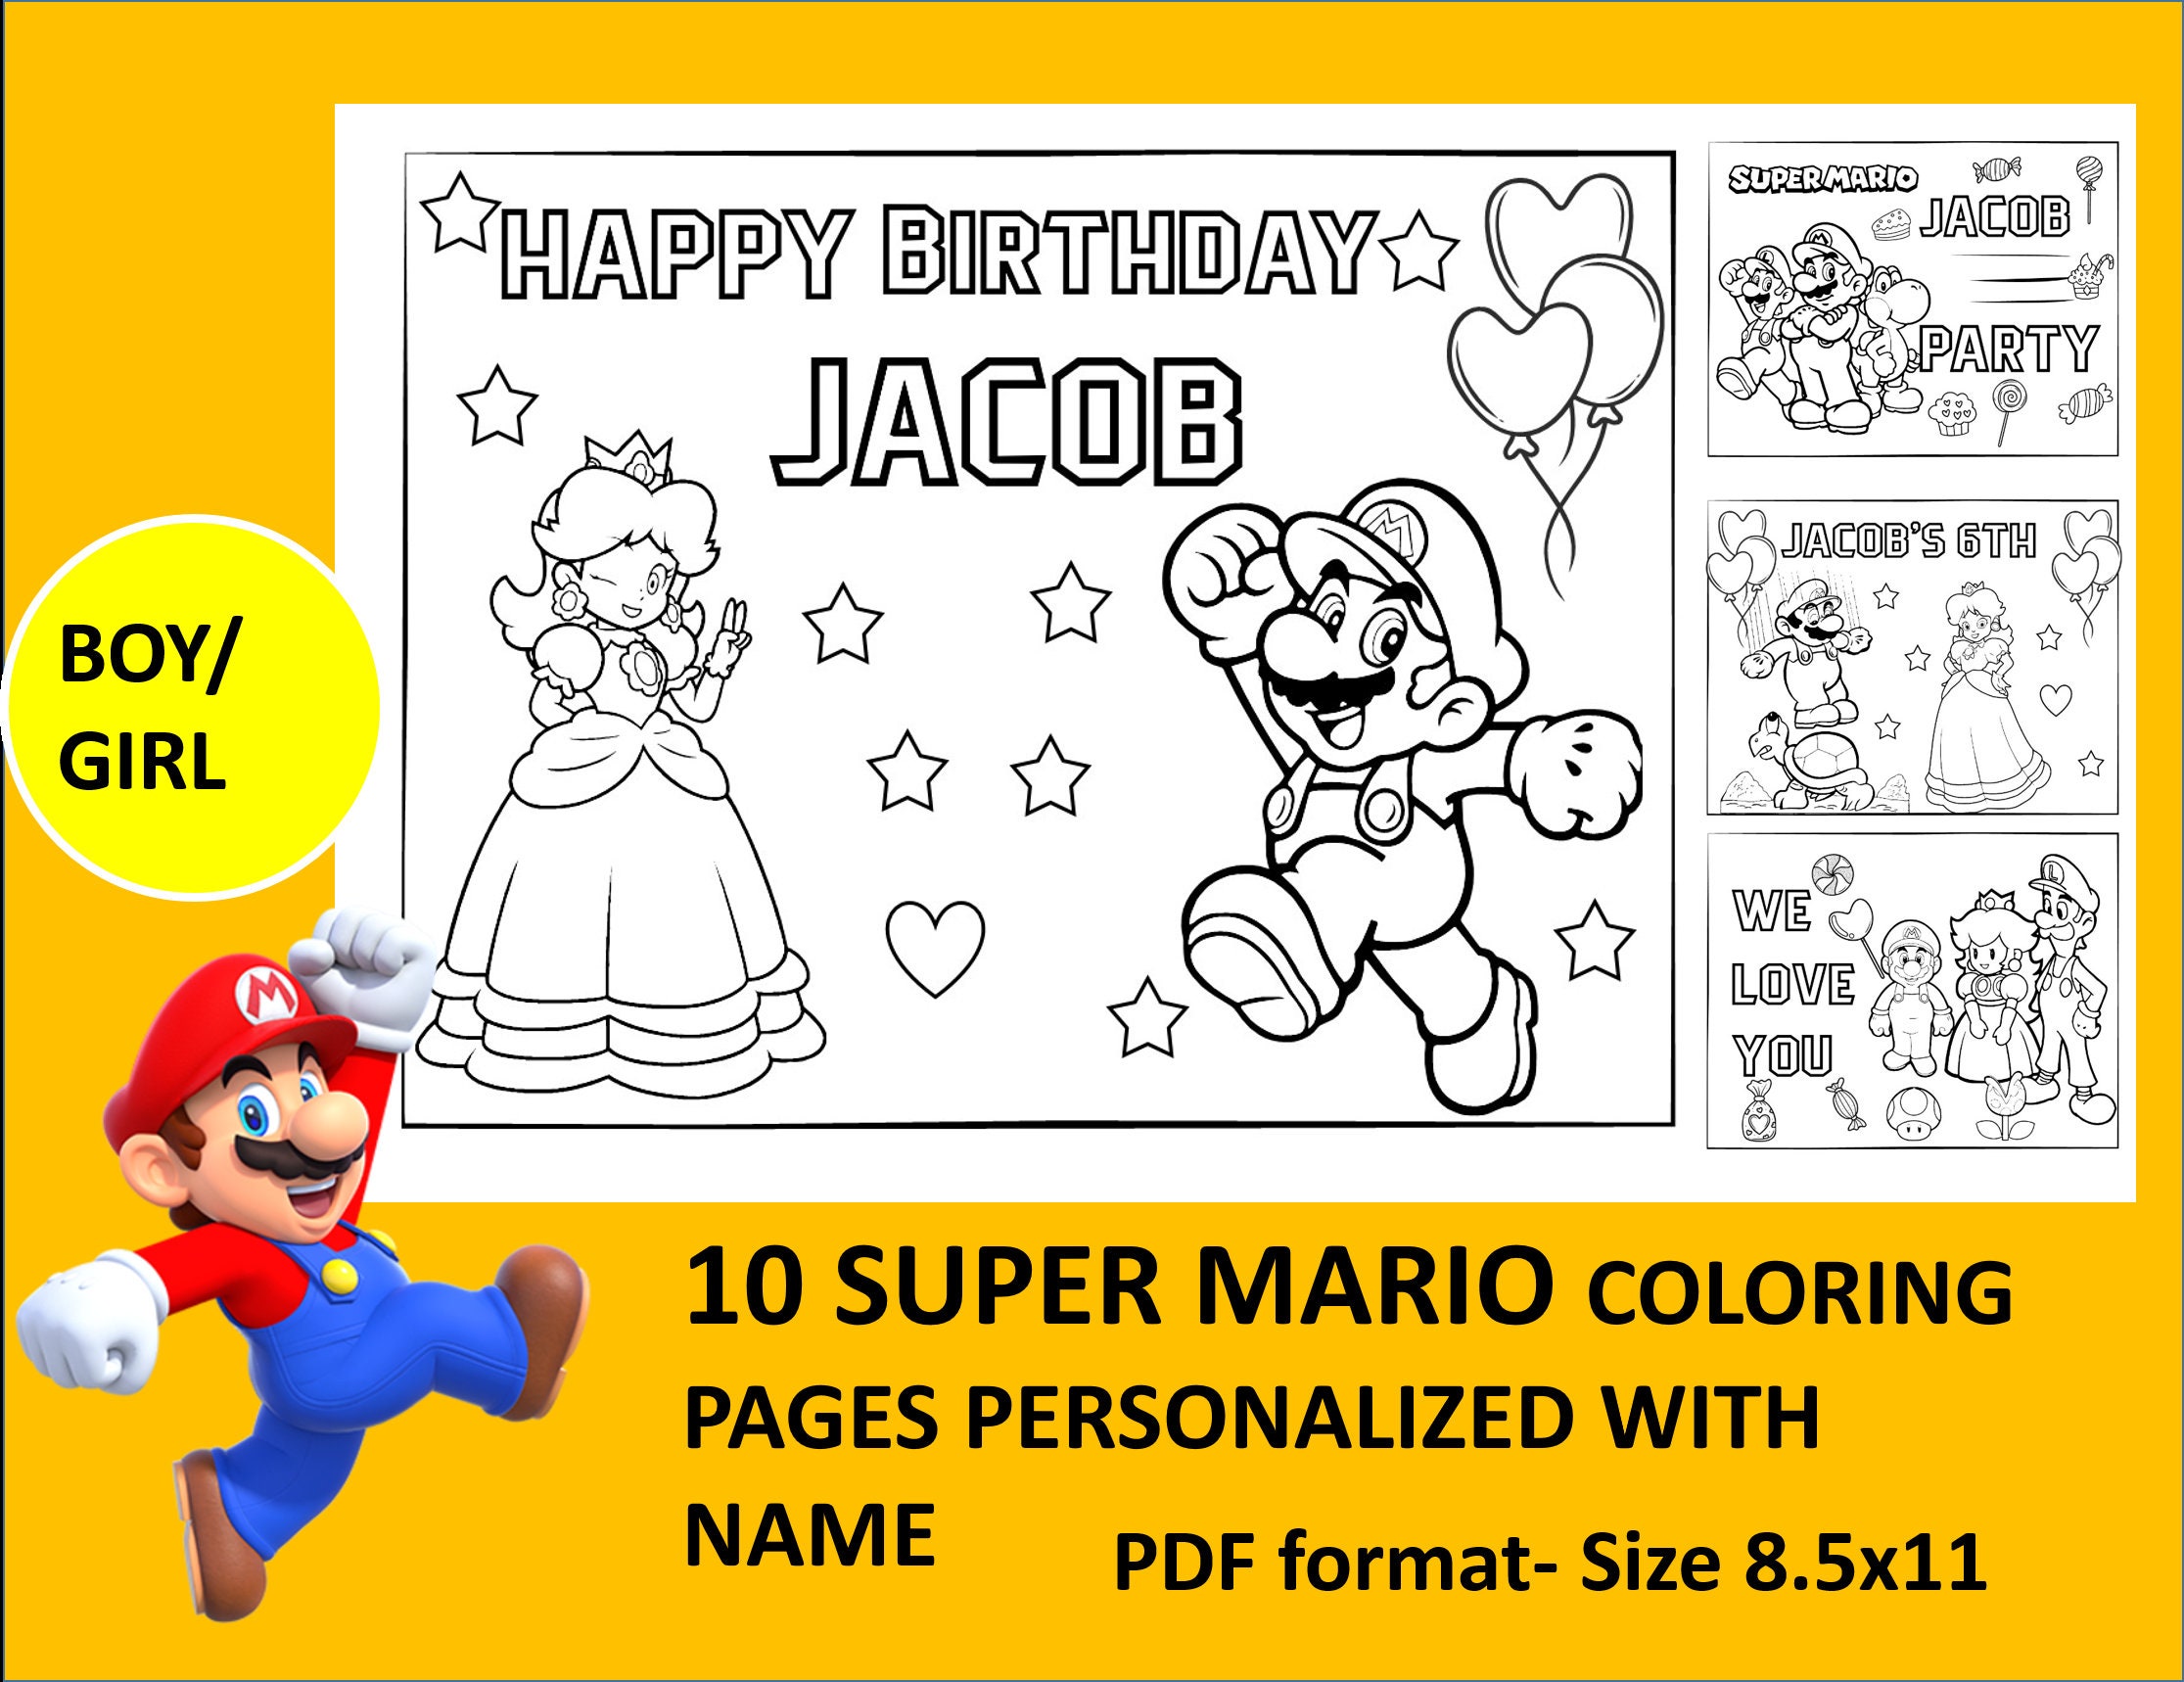 24PCS Mario Coloring Books Bulk for Kids Mini DIY Drawing Book Set for  Mario Party Favors Birthday Gifts Party Favors Class Activity Supplies